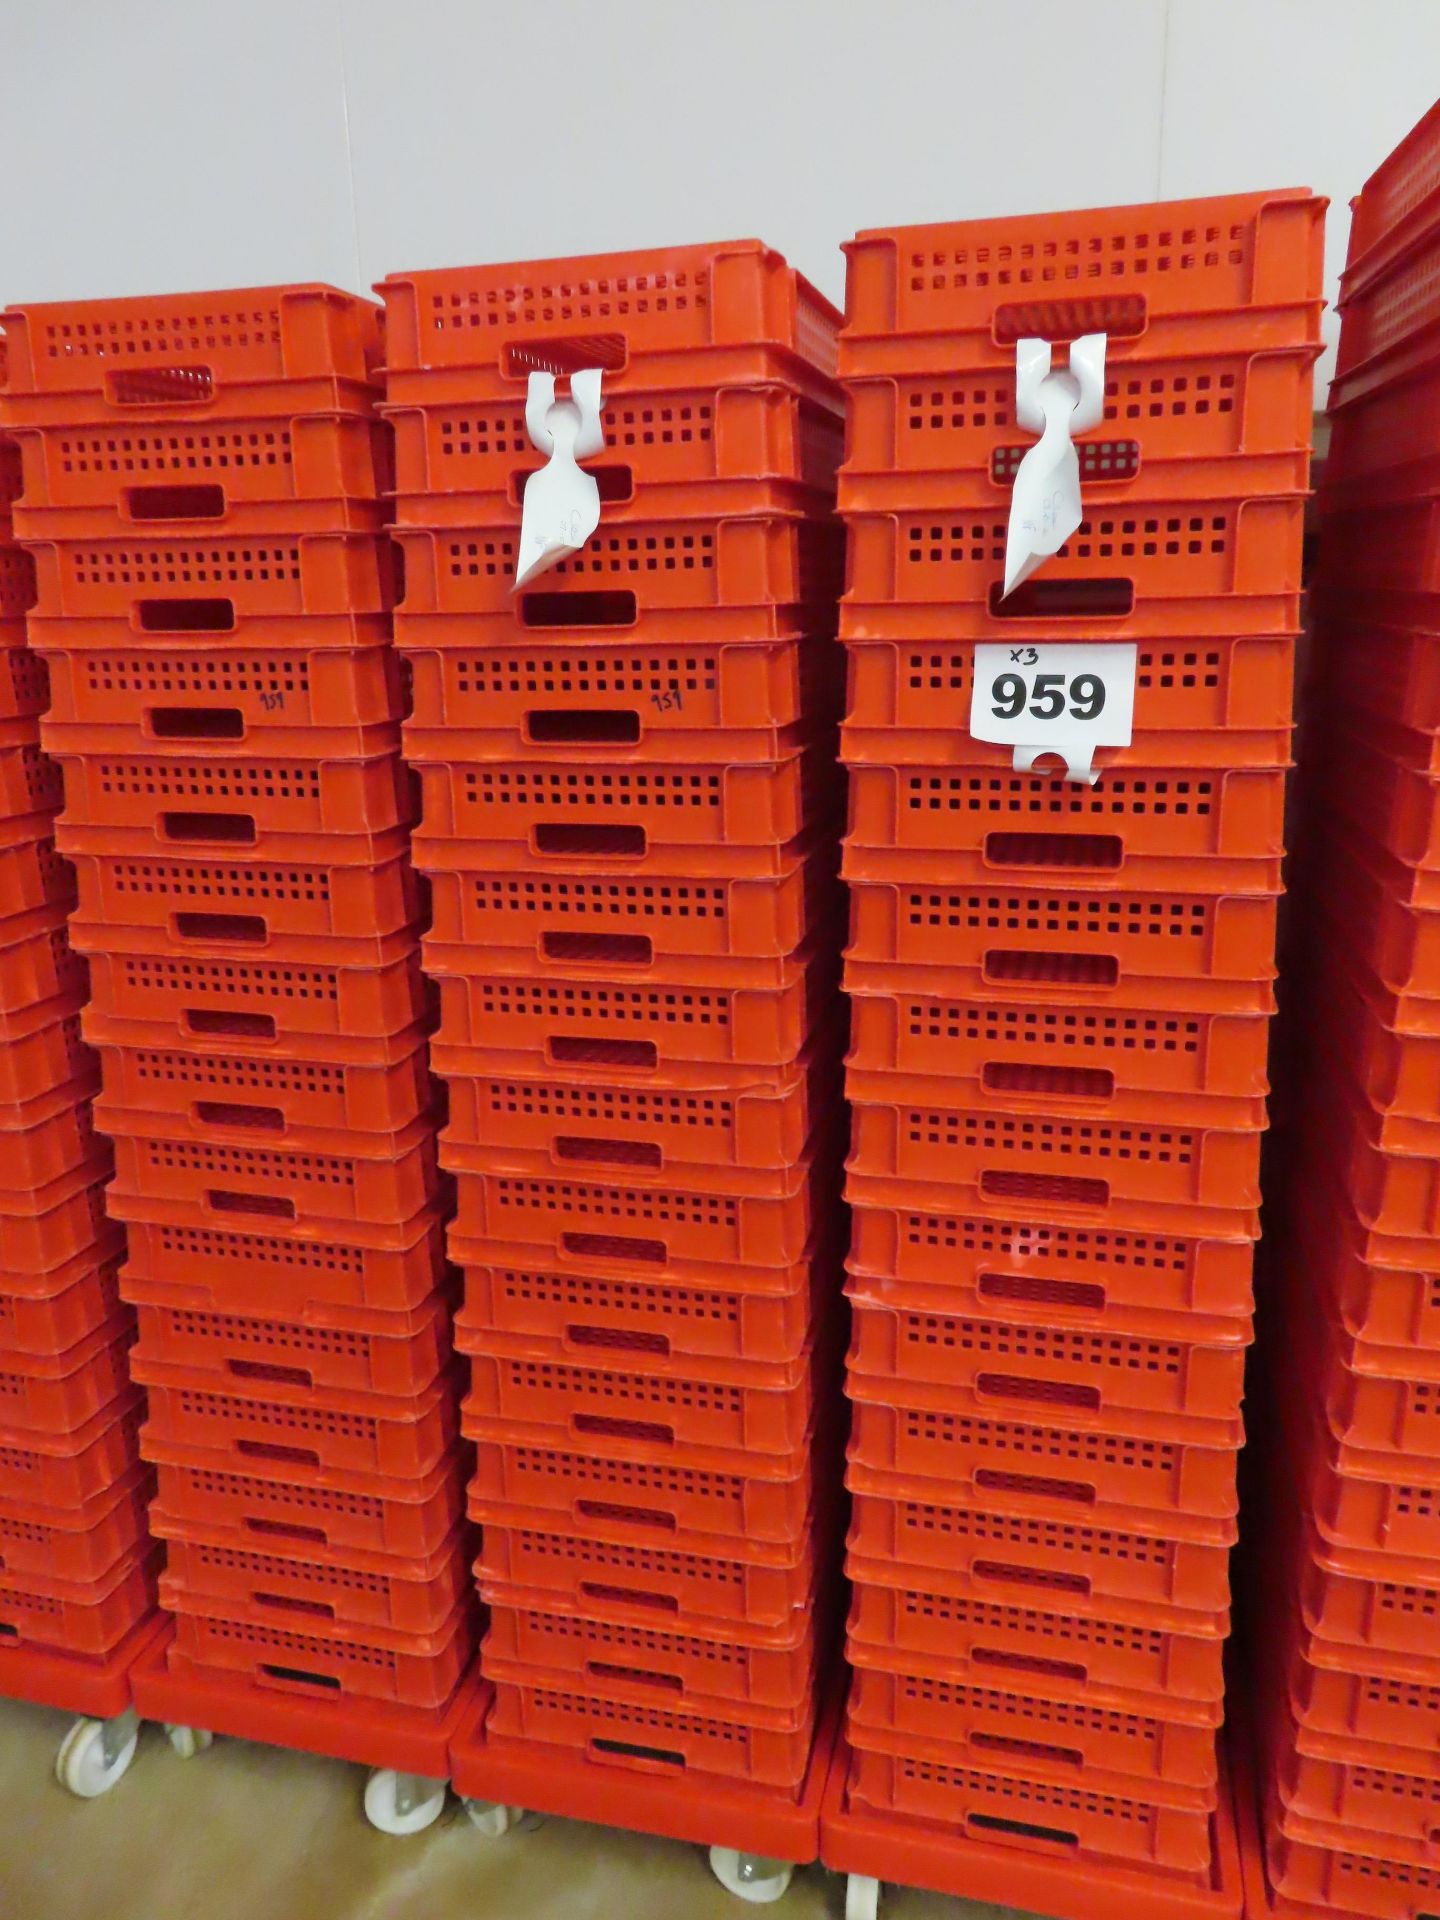 3 X DOLLIES HOLDING QTY RED PERFORATED TRAYS.16 trays per dolly. 48 trays